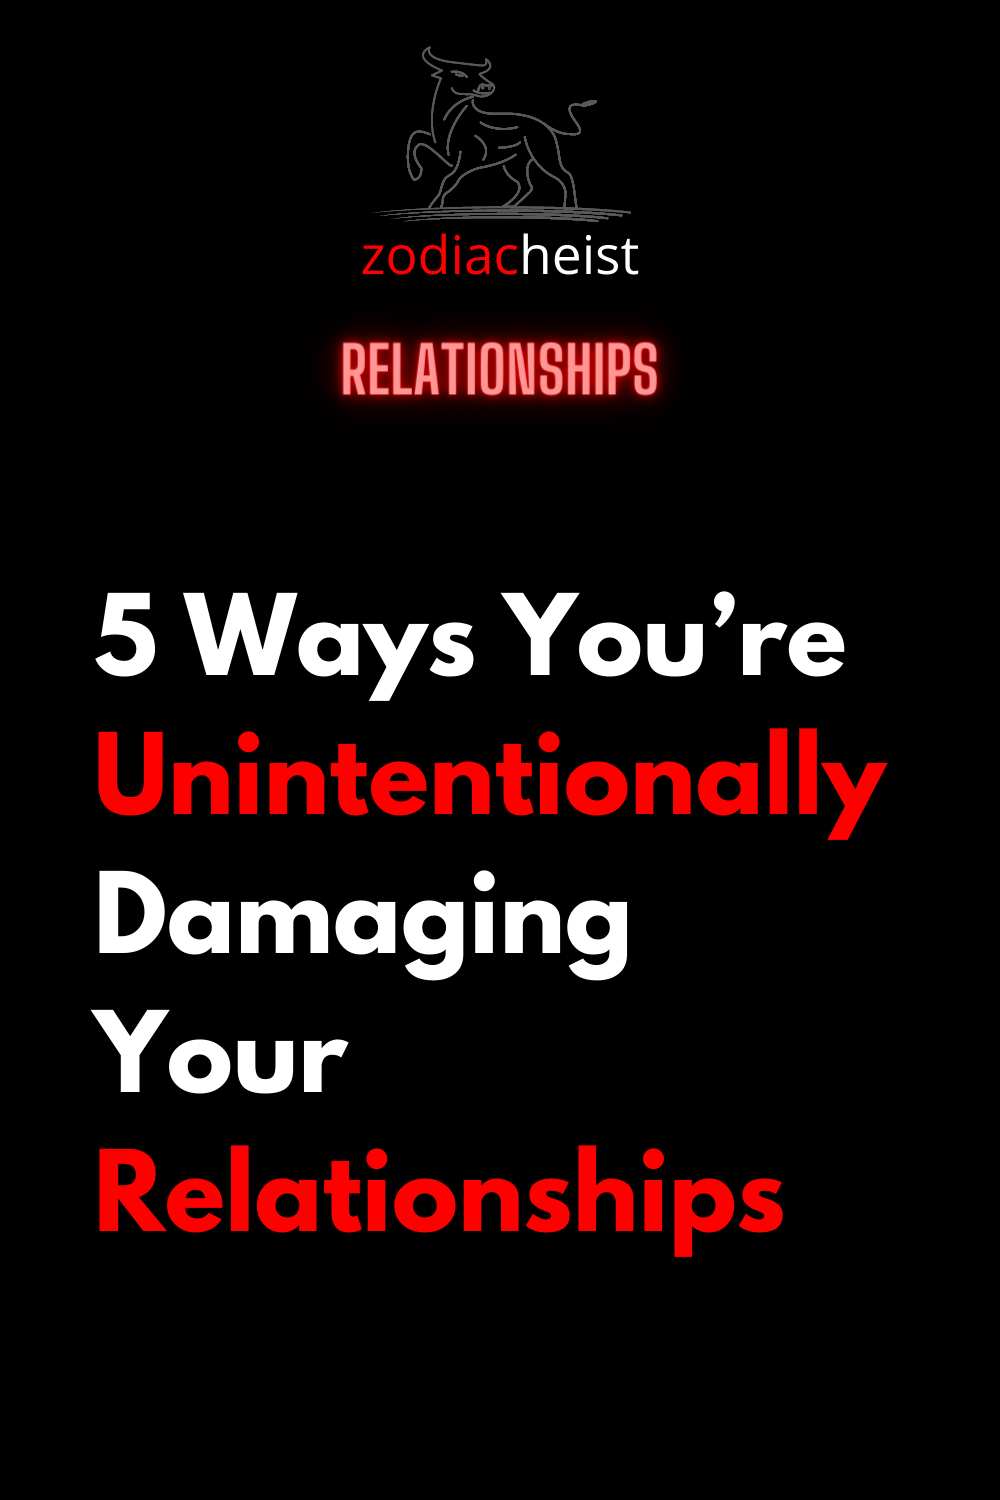 5 Ways You’re Unintentionally Damaging Your Relationships